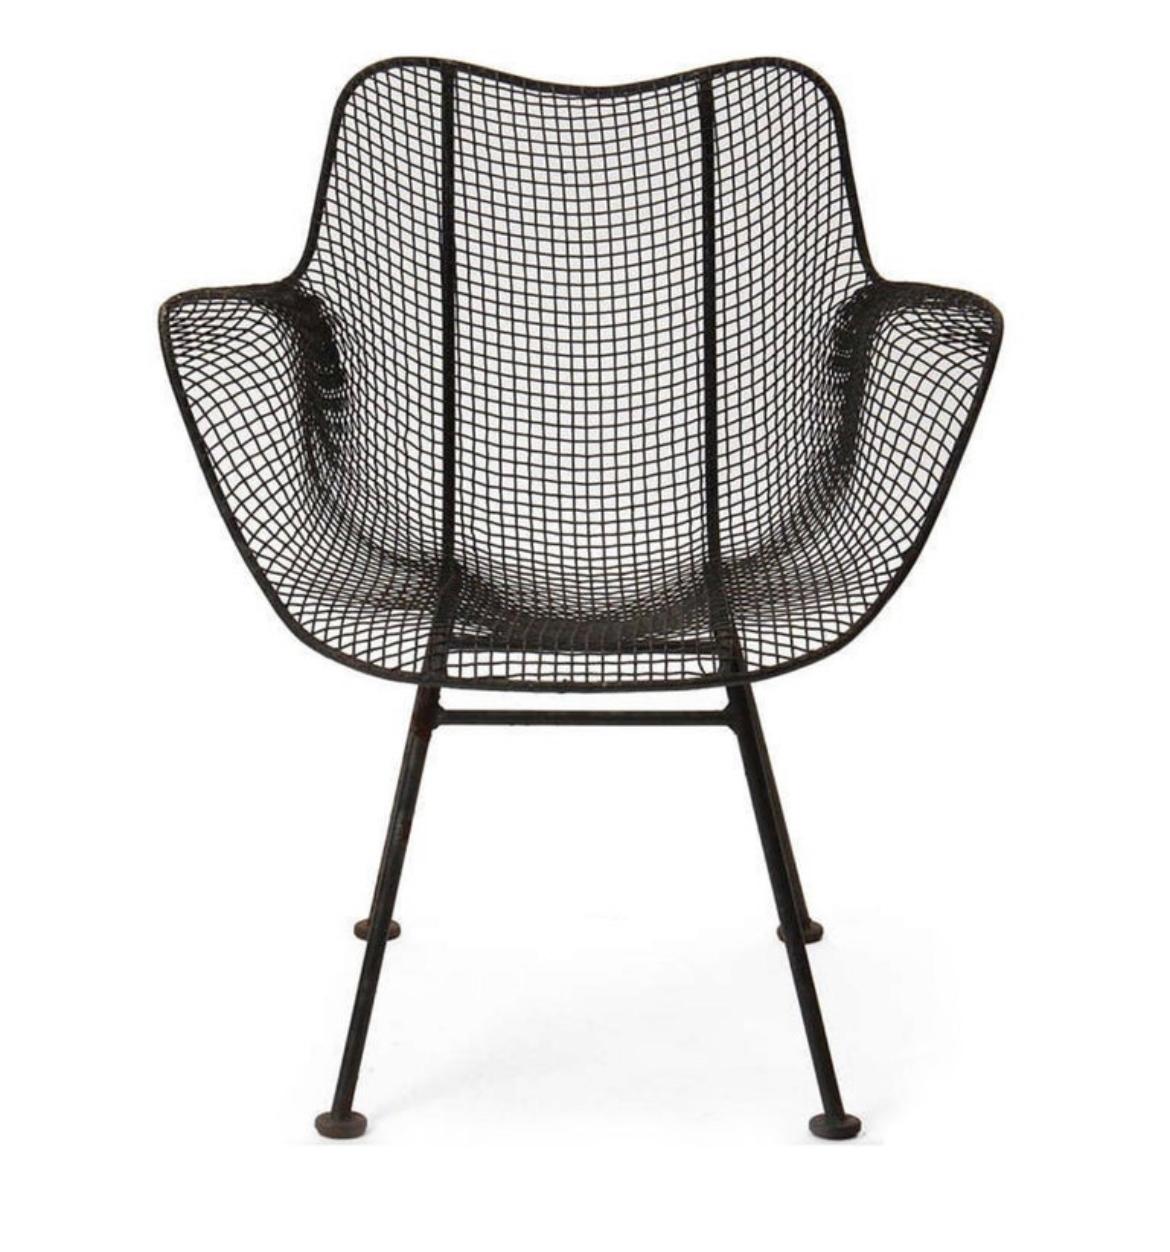 Set of (4) mid-century Russell Woodard sculptura mesh organically sculpted Patio armchairs. Very Iconic Designed outdoor Patio Chairs. All chairs are original Circa 1960 - they have been repainted with an outdoor black Satin paint. Chairs are